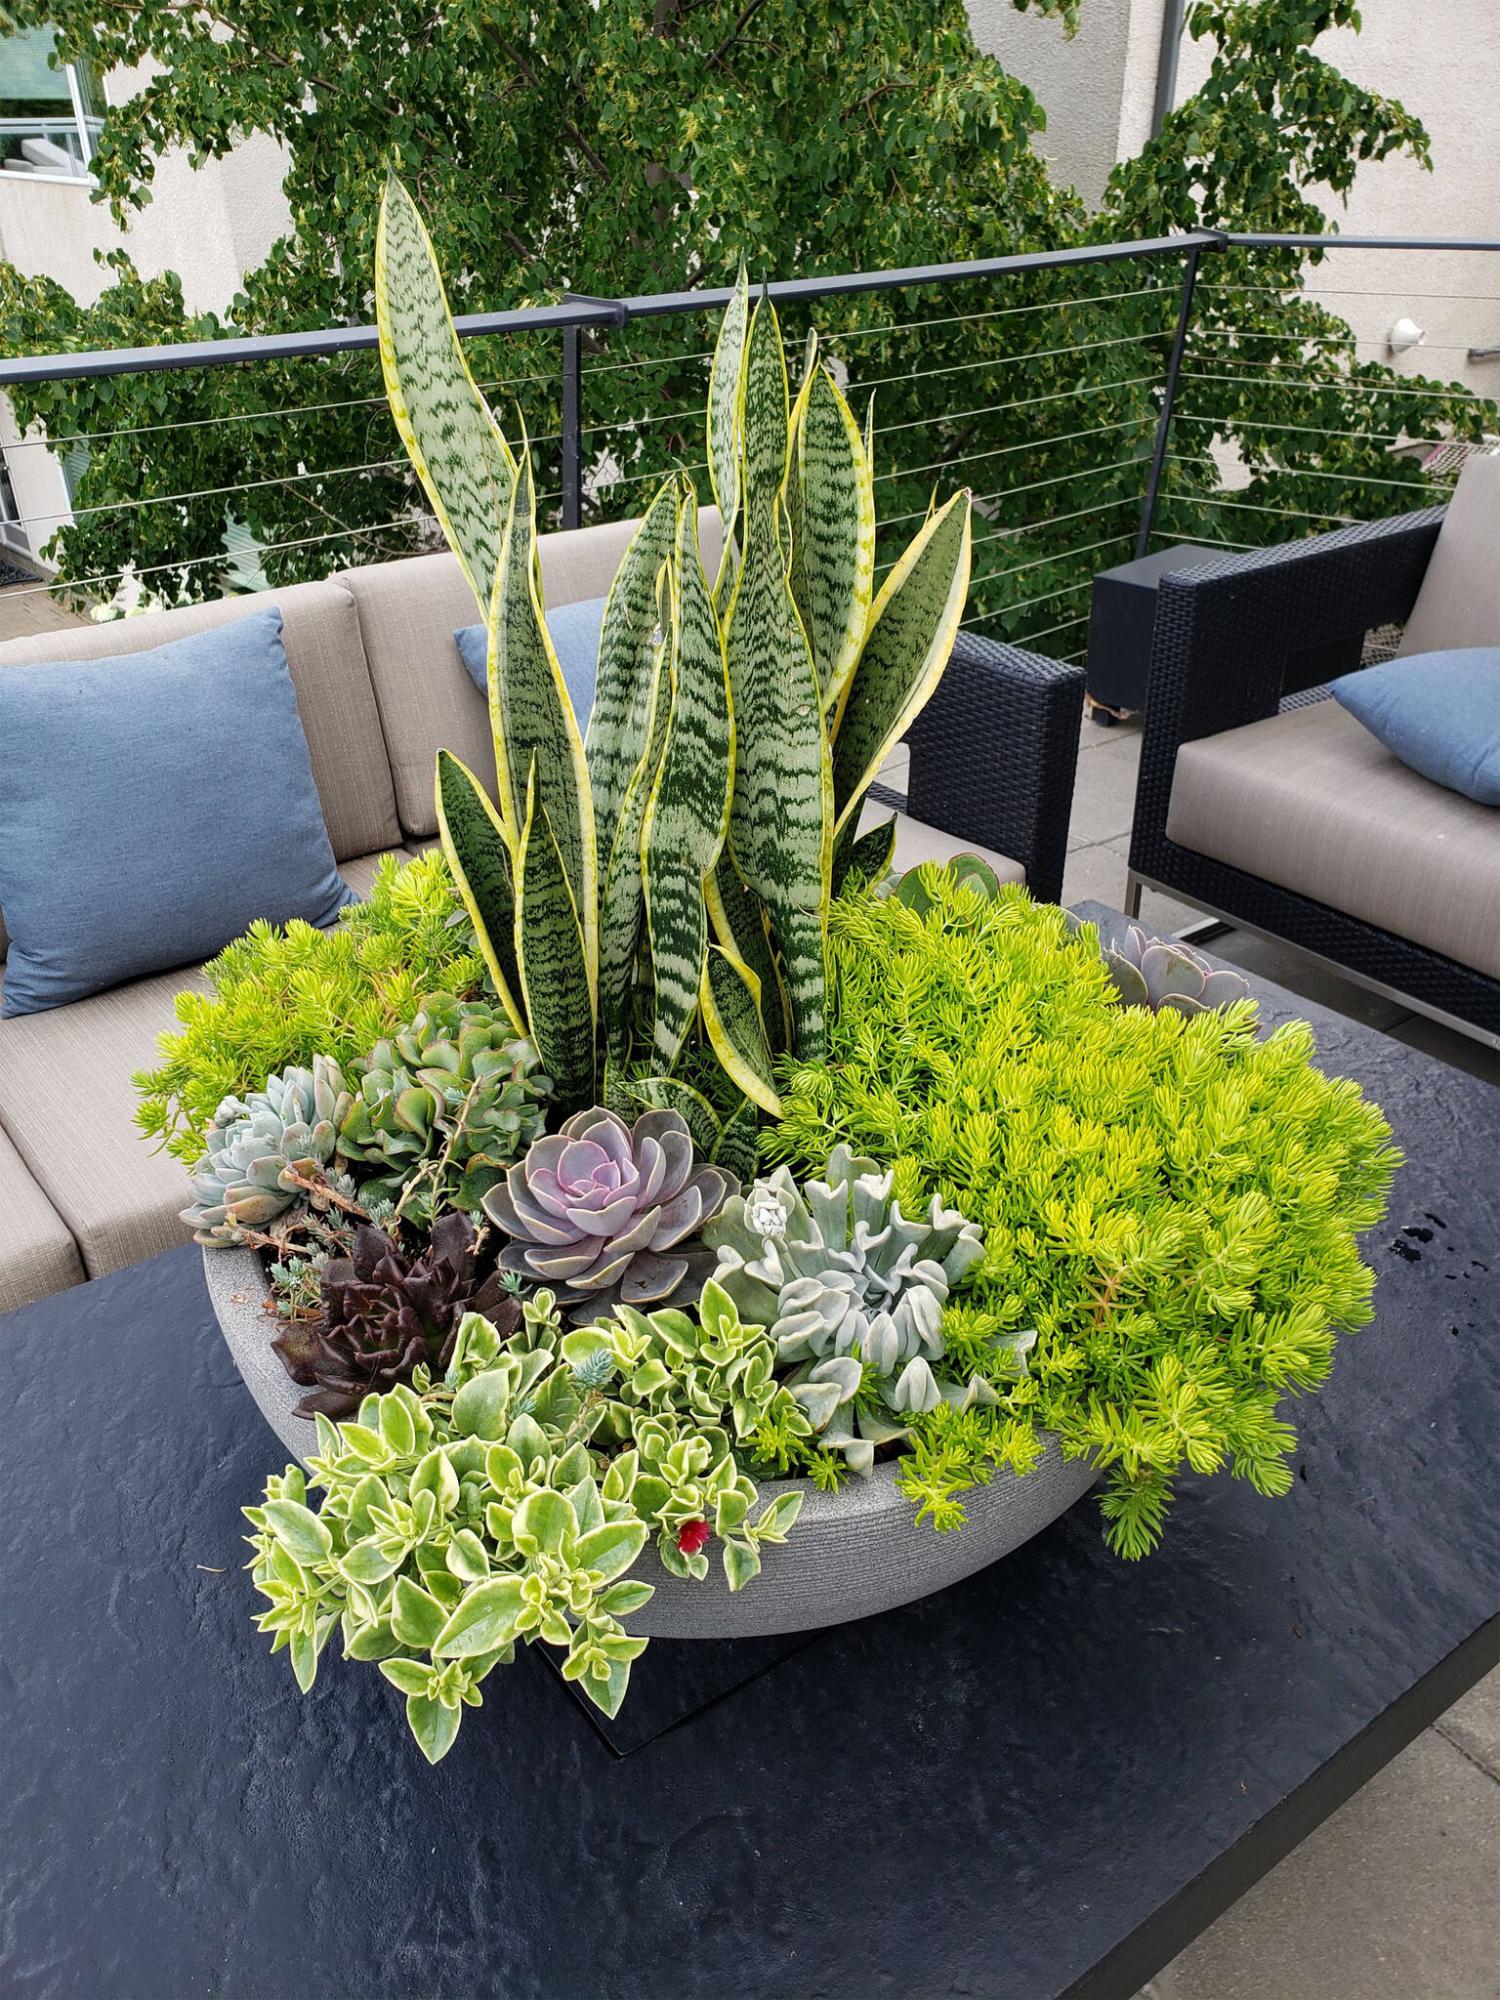 <p>Photos by Karen Chopp</p><p>Sansevieria, with its sword-like foliage, is the thriller in this tabletop planter design by Karen Chopp, the Barefoot Gardener.</p>